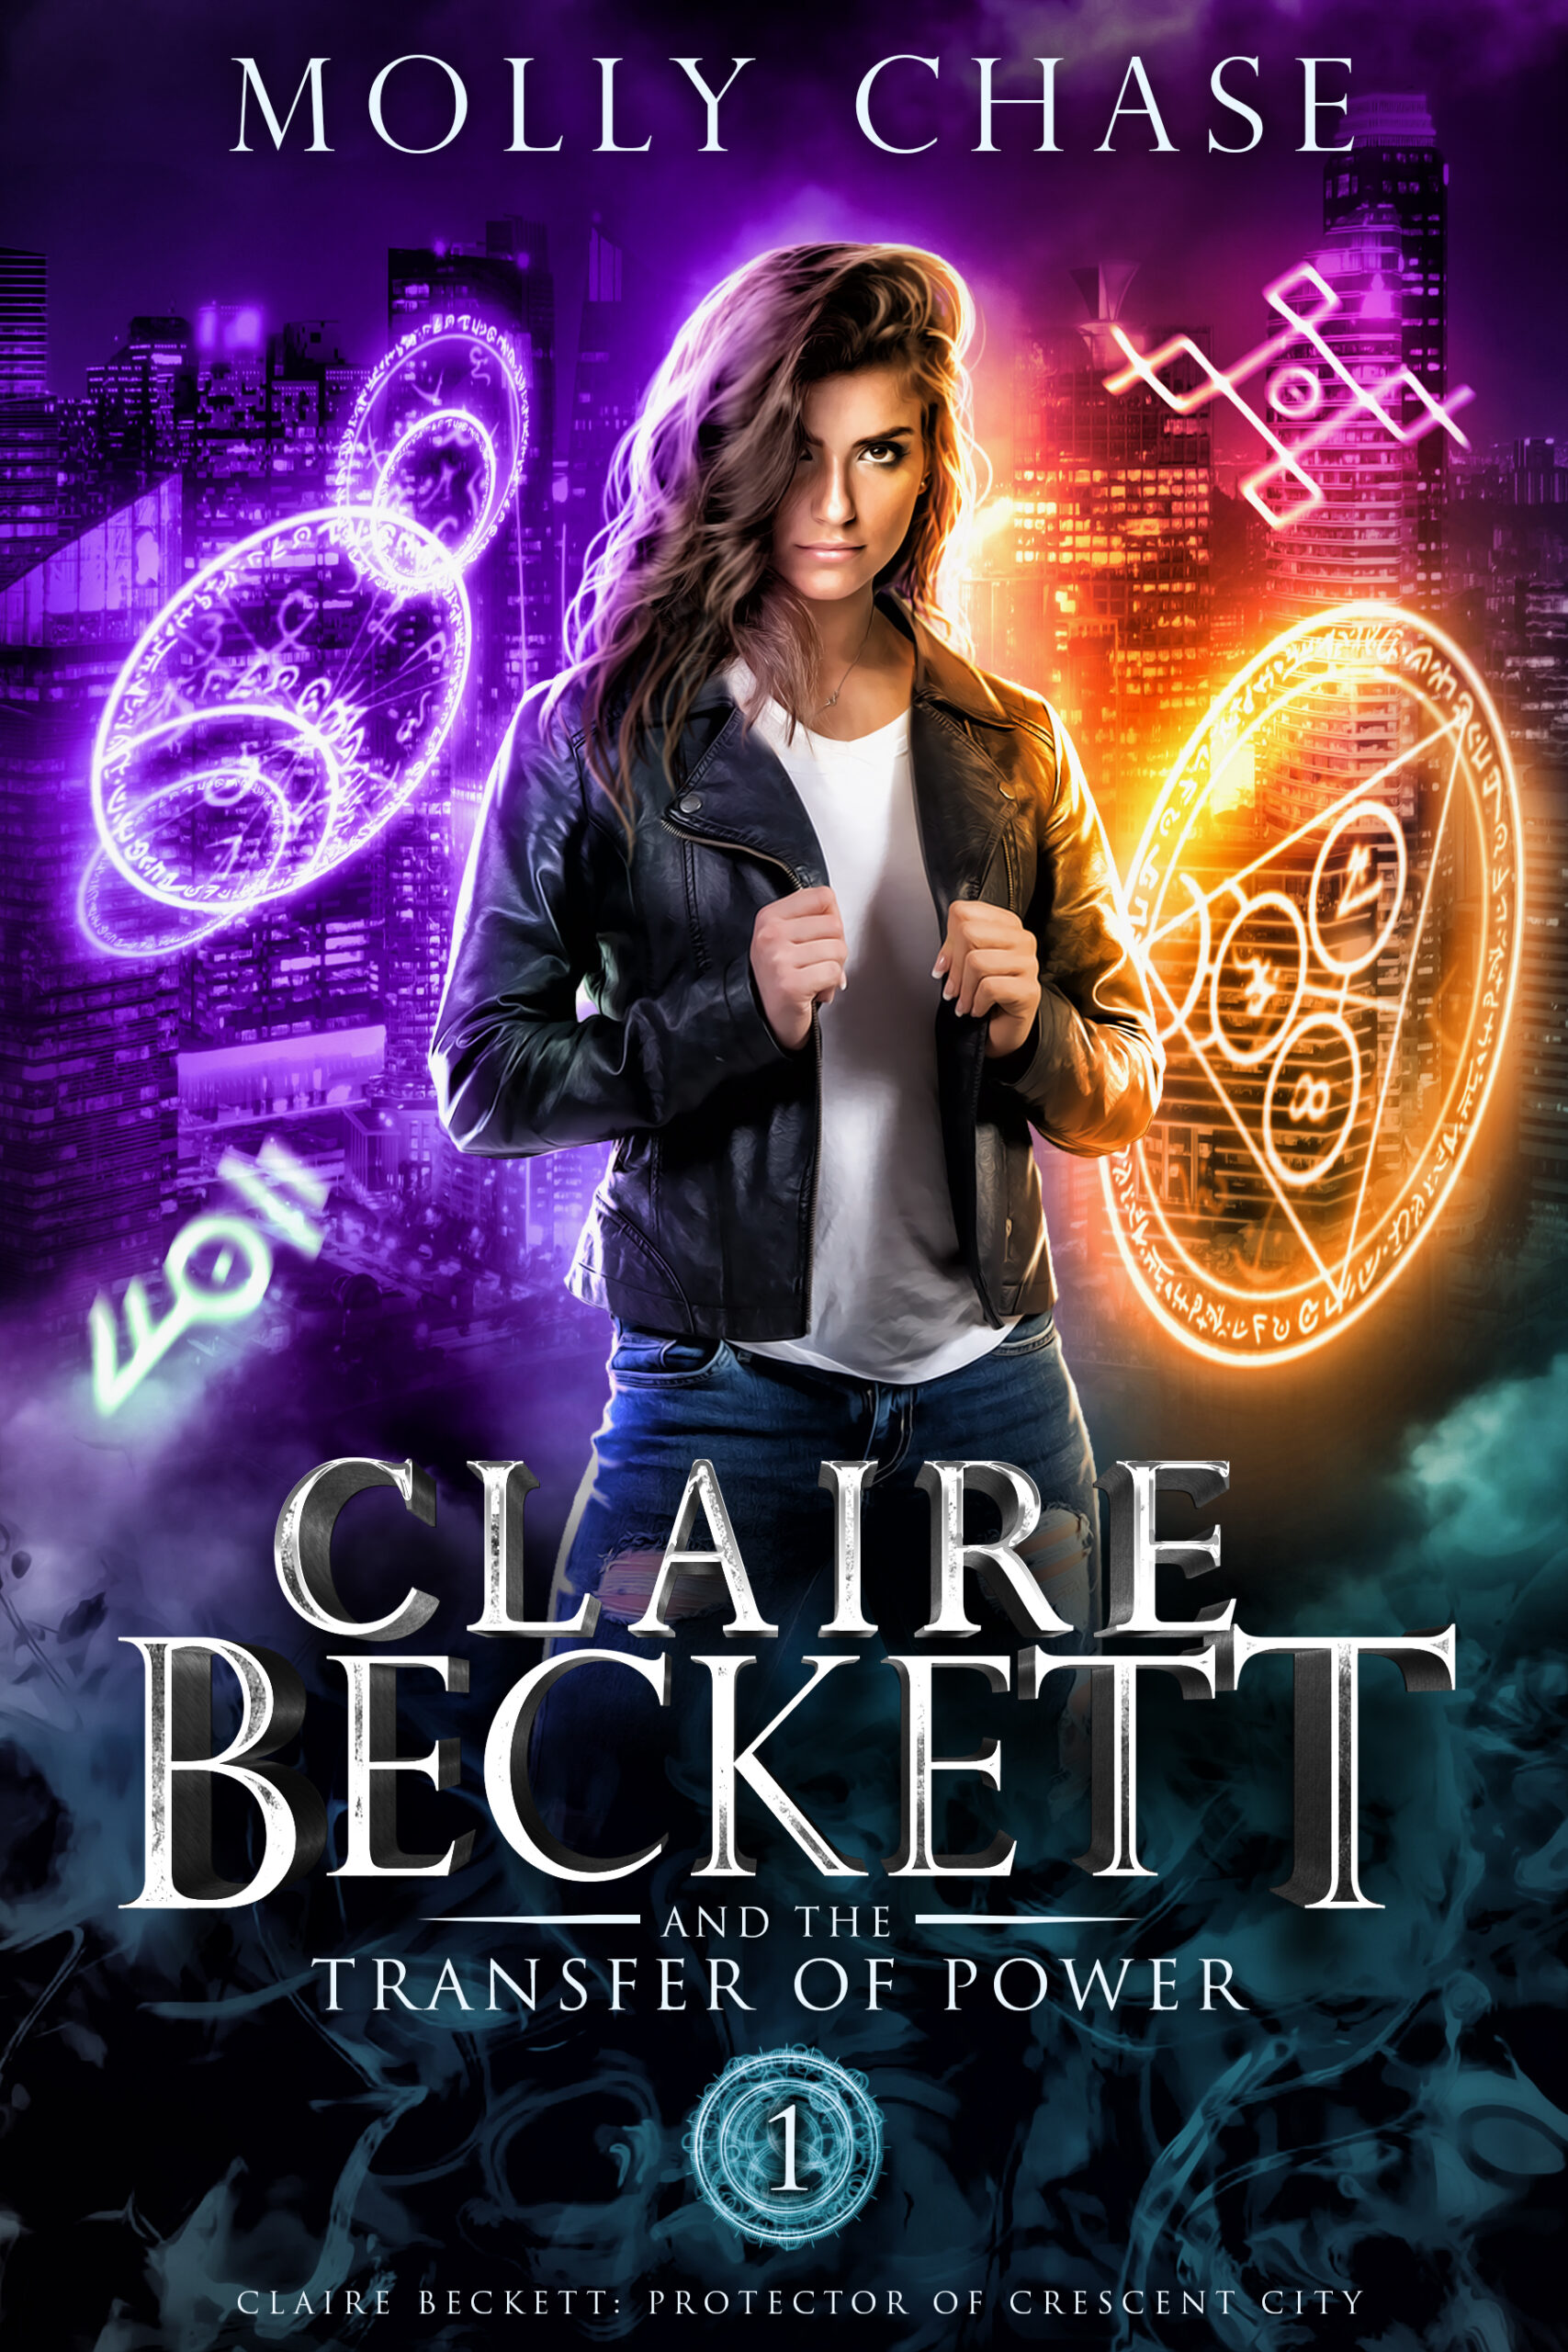 FREE: Claire Beckett and the Transfer of Power by Molly Chase